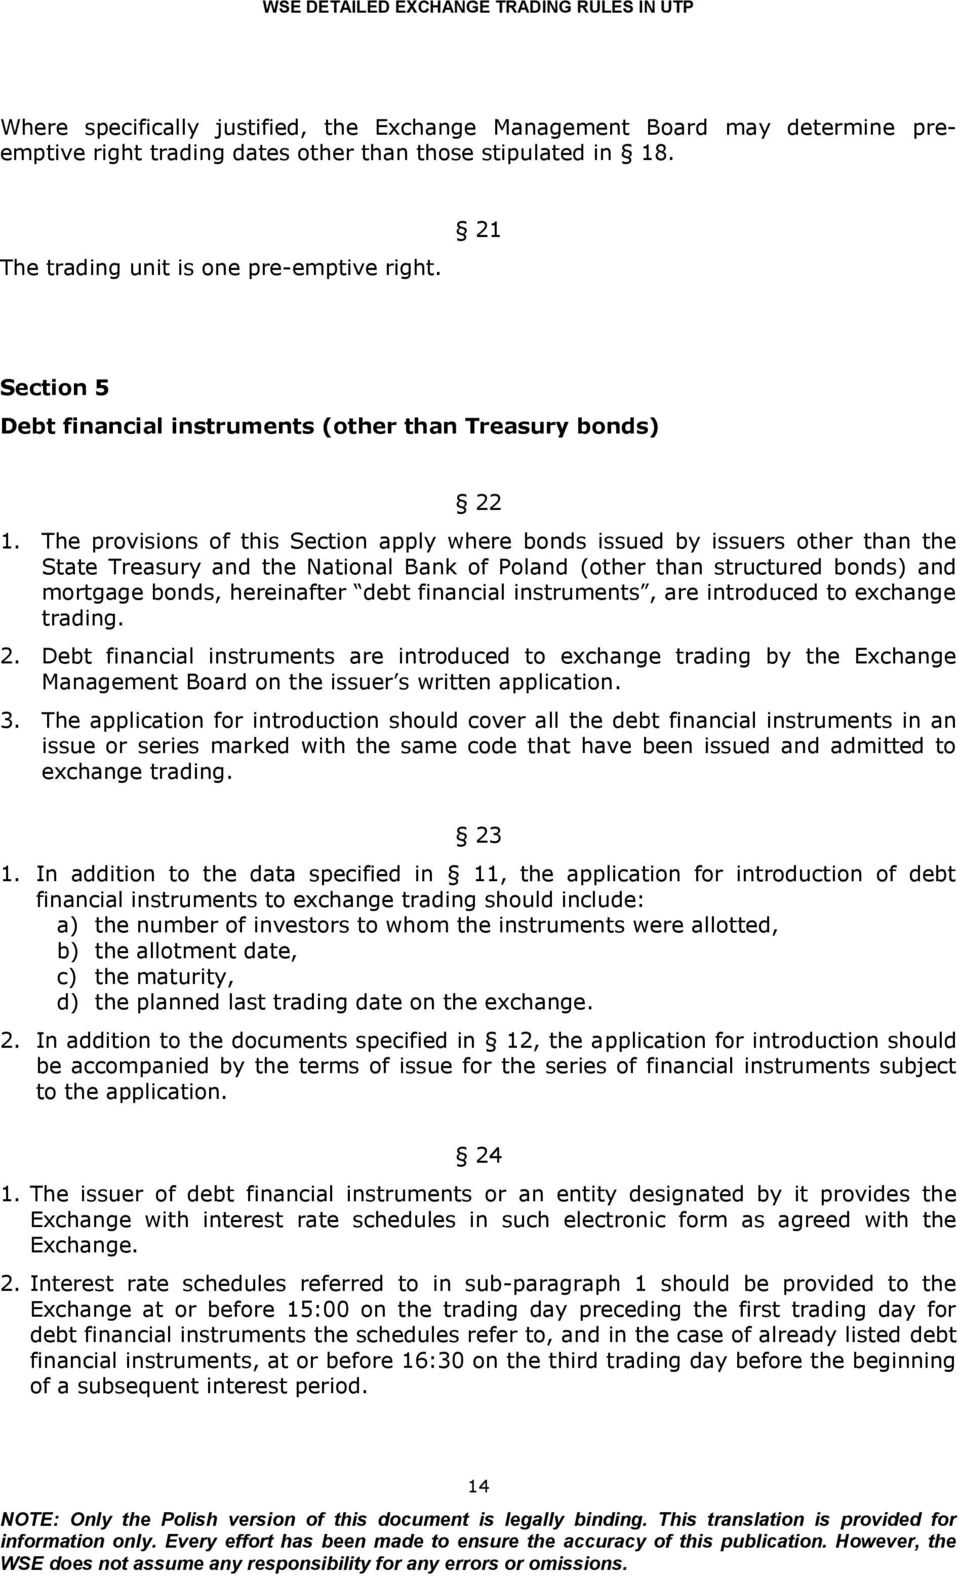 The provisions of this Section apply where bonds issued by issuers other than the State Treasury and the National Bank of Poland (other than structured bonds) and mortgage bonds, hereinafter debt